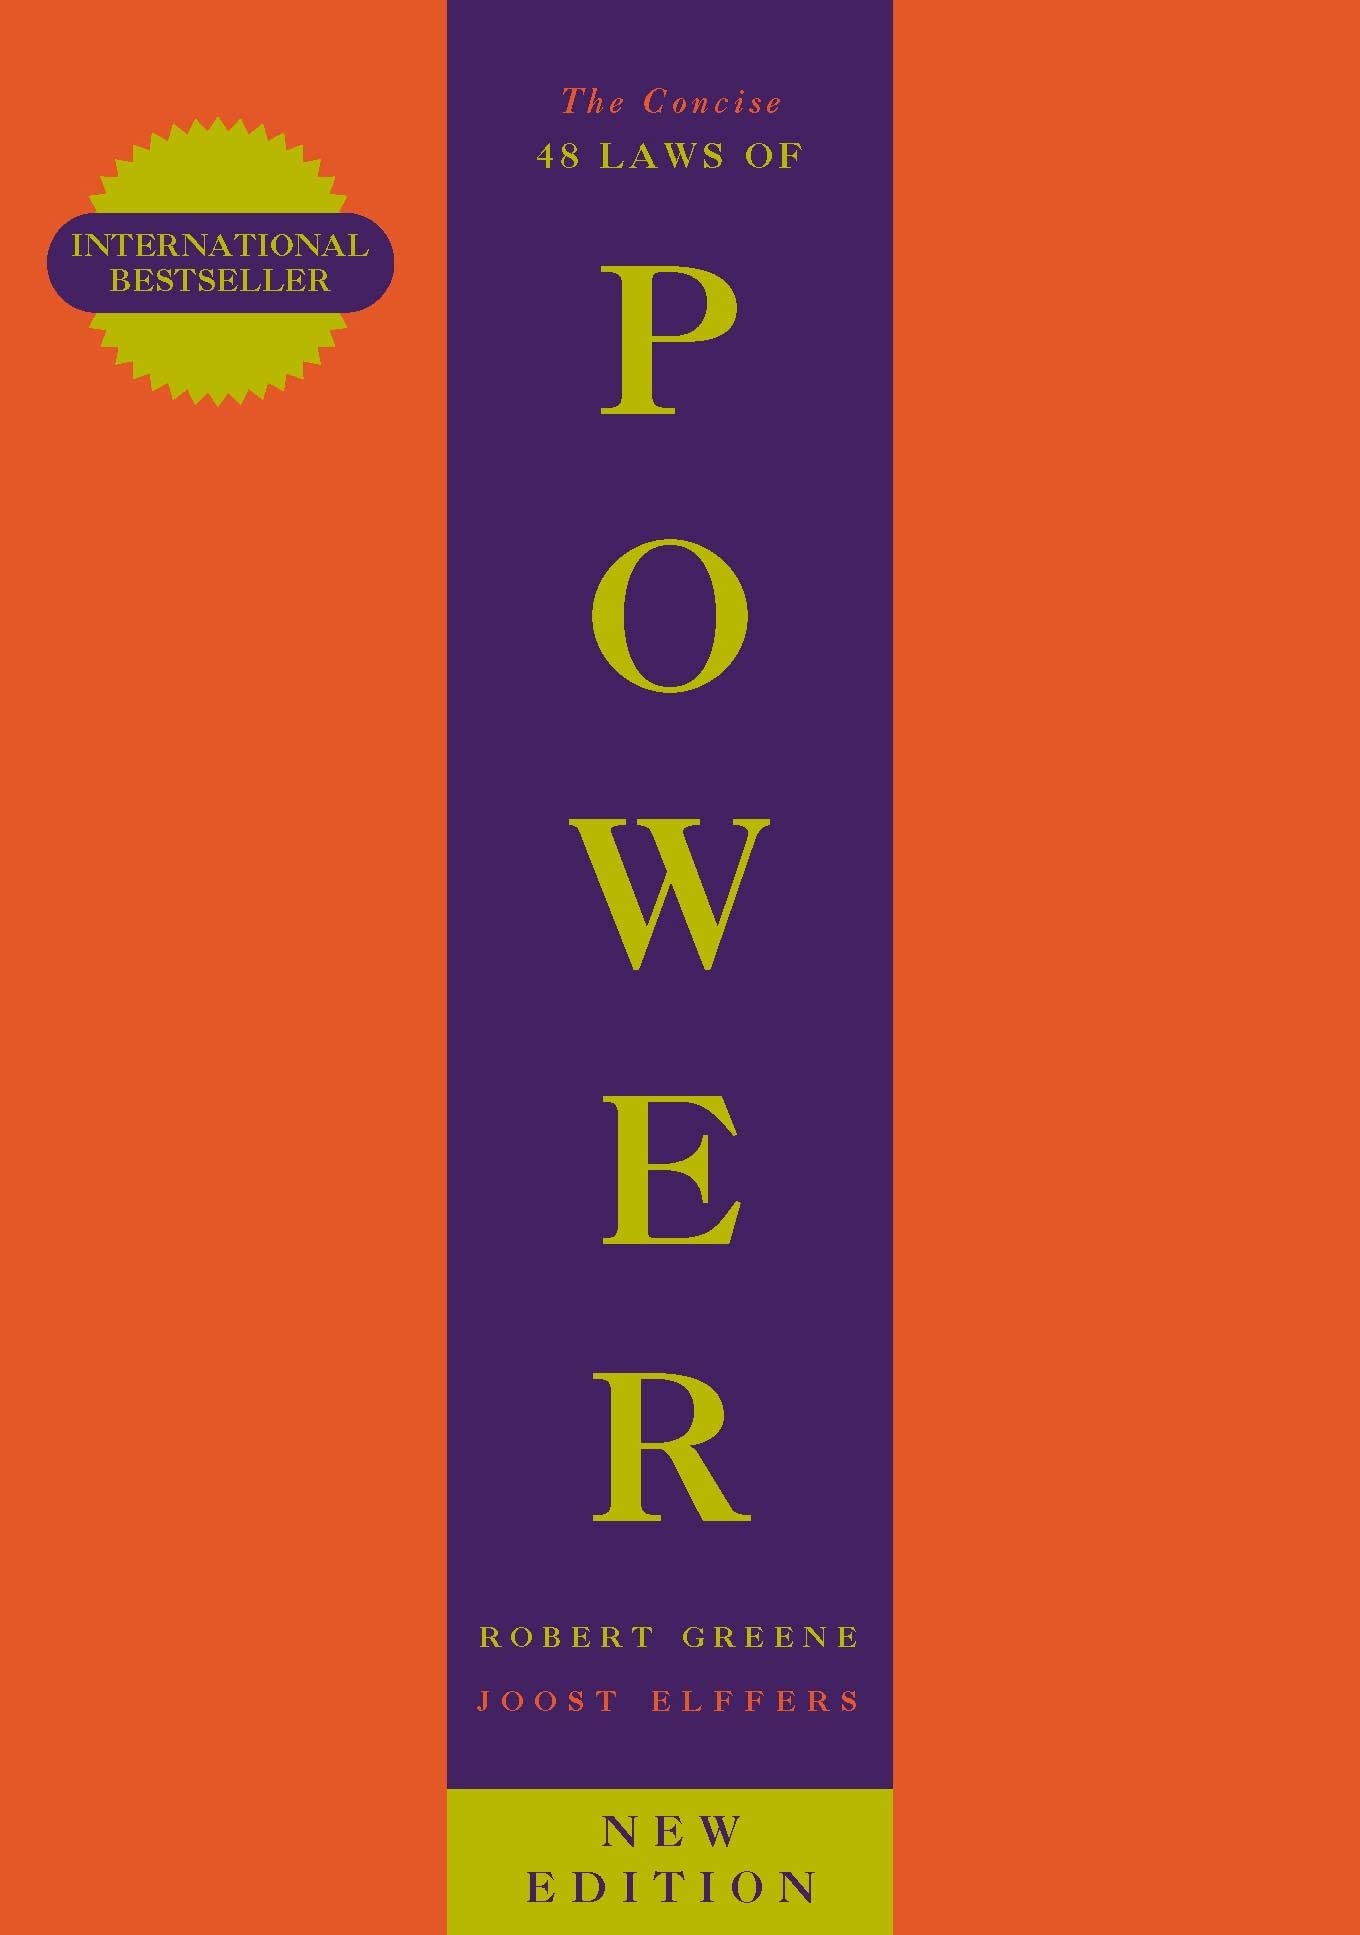 THE CONCISE 48 LAWS OF POWER (পেপারব্যাক)